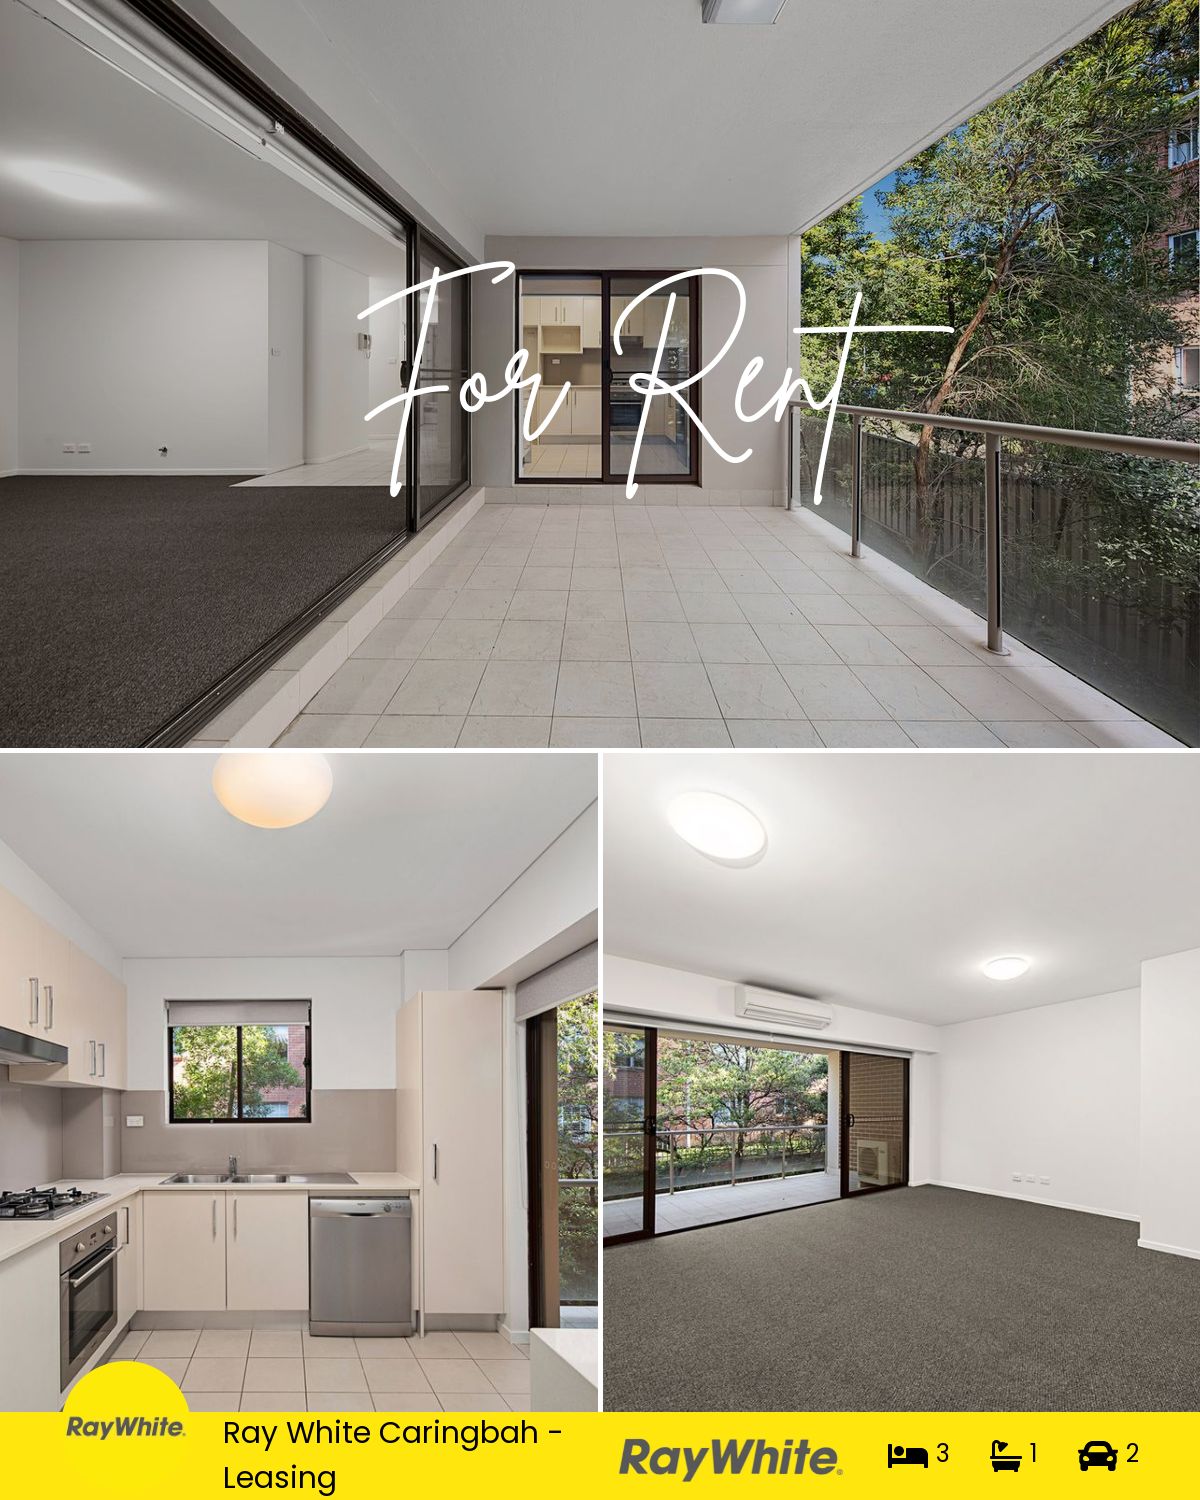 8/6-8 Banksia Rd, Caringbah, NSW 2229 | Realty.com.au